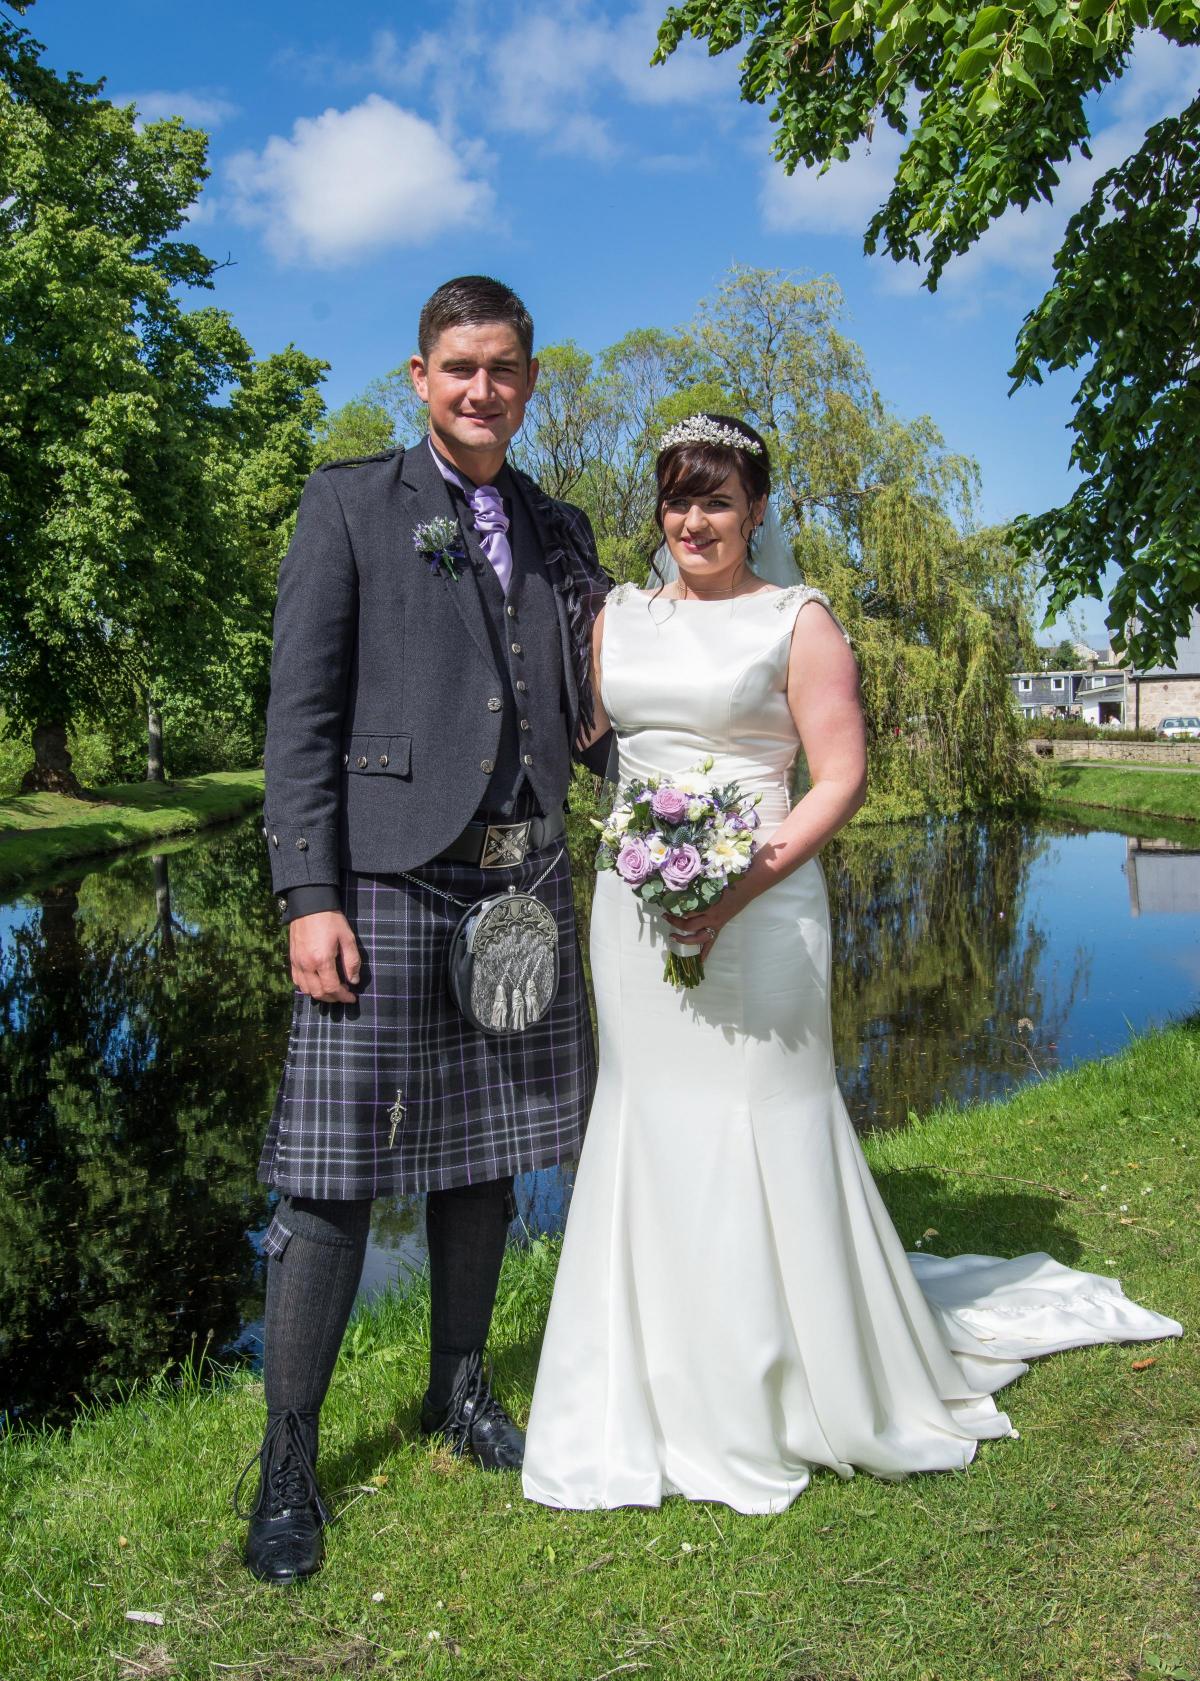 Kim Mair of Montgomerieston Farm, Dalrymple, married Jamie McGowan, of Prestwick, at St Laurence Church, Forres